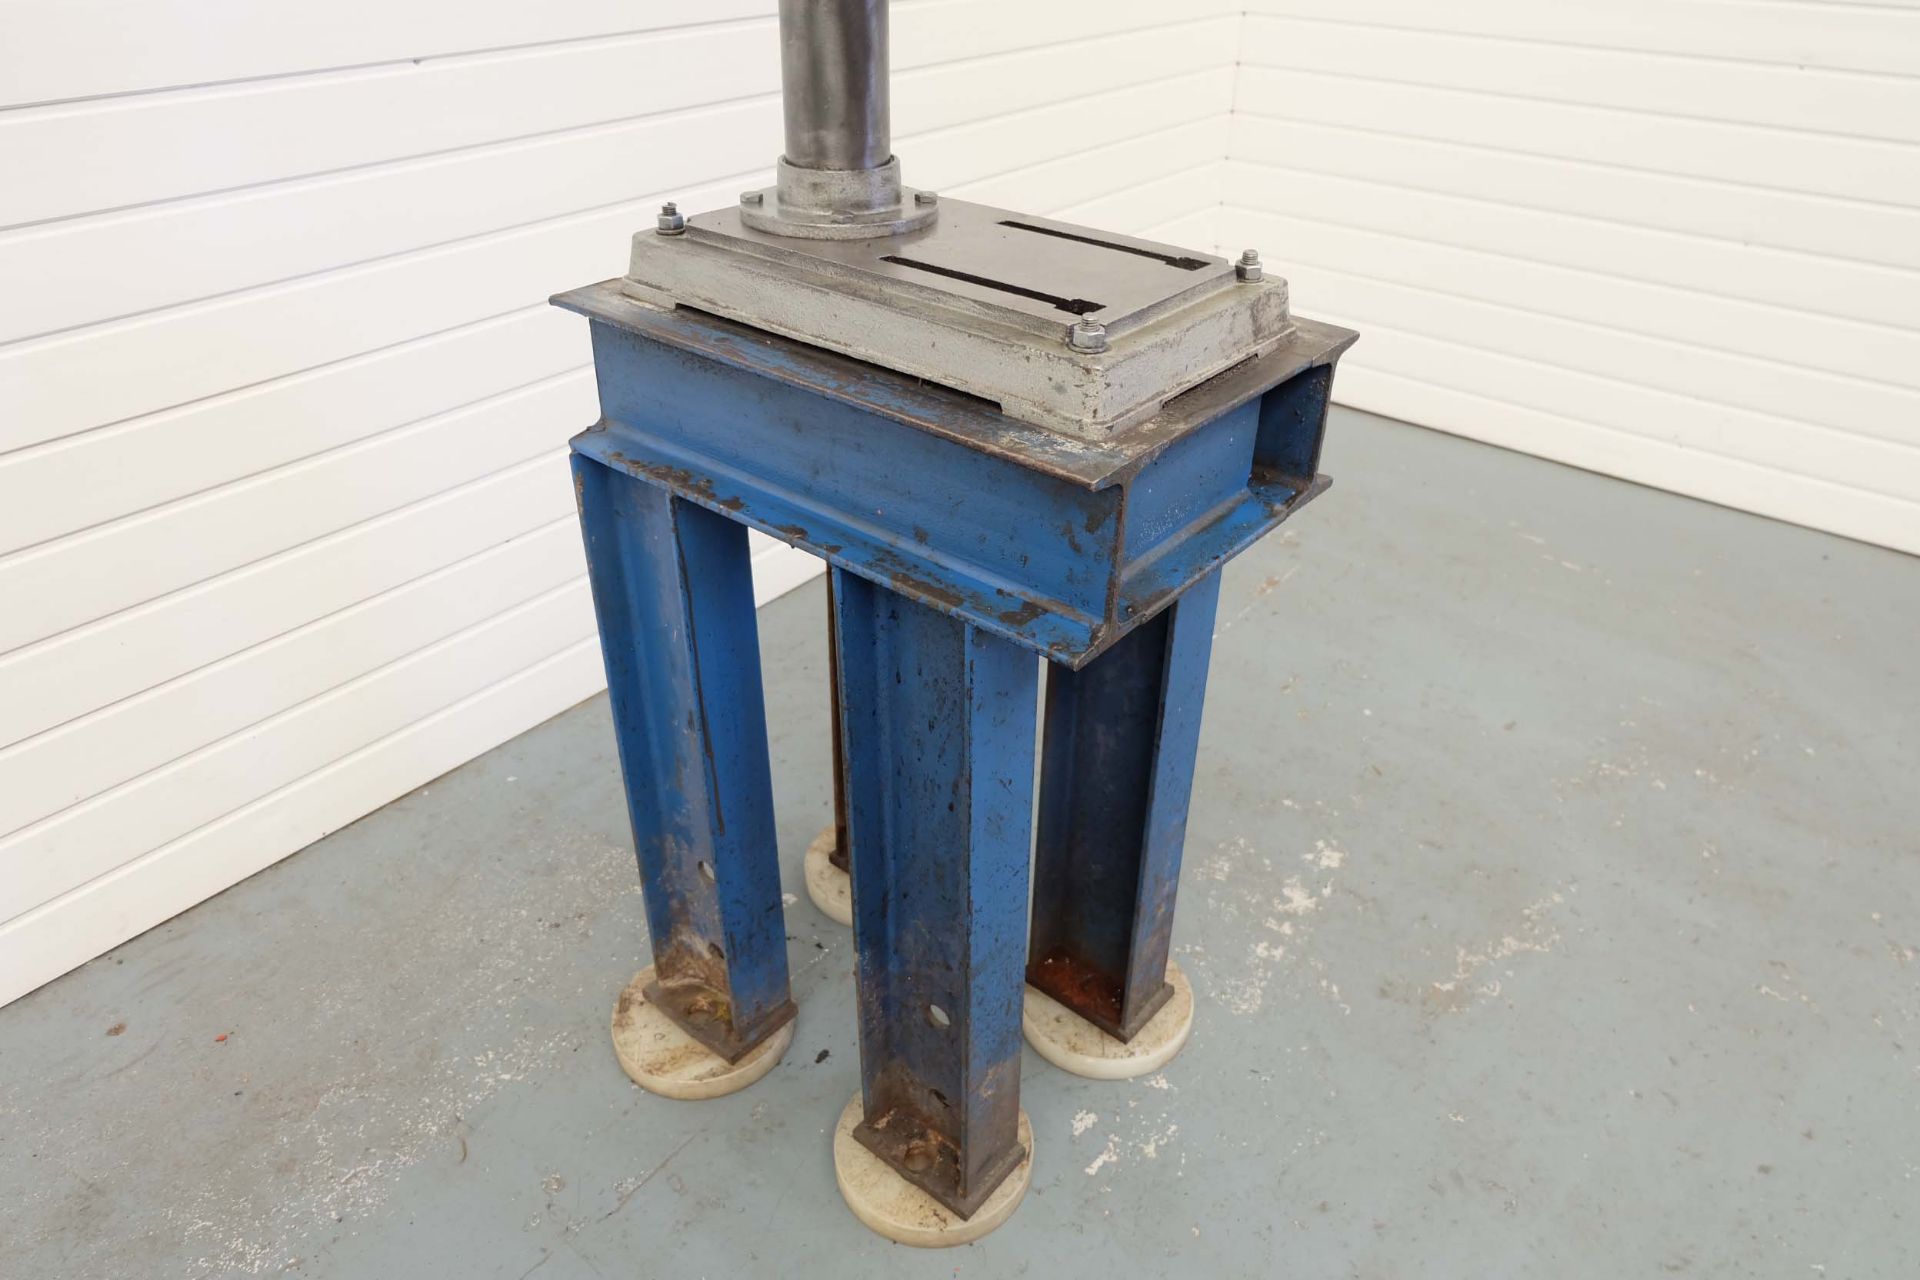 Draper Expert Bench Drill On Steel Stand. Drilling Capacity 19mm. Chuck Capacity 1 -13mm. Spindle Ta - Image 9 of 11